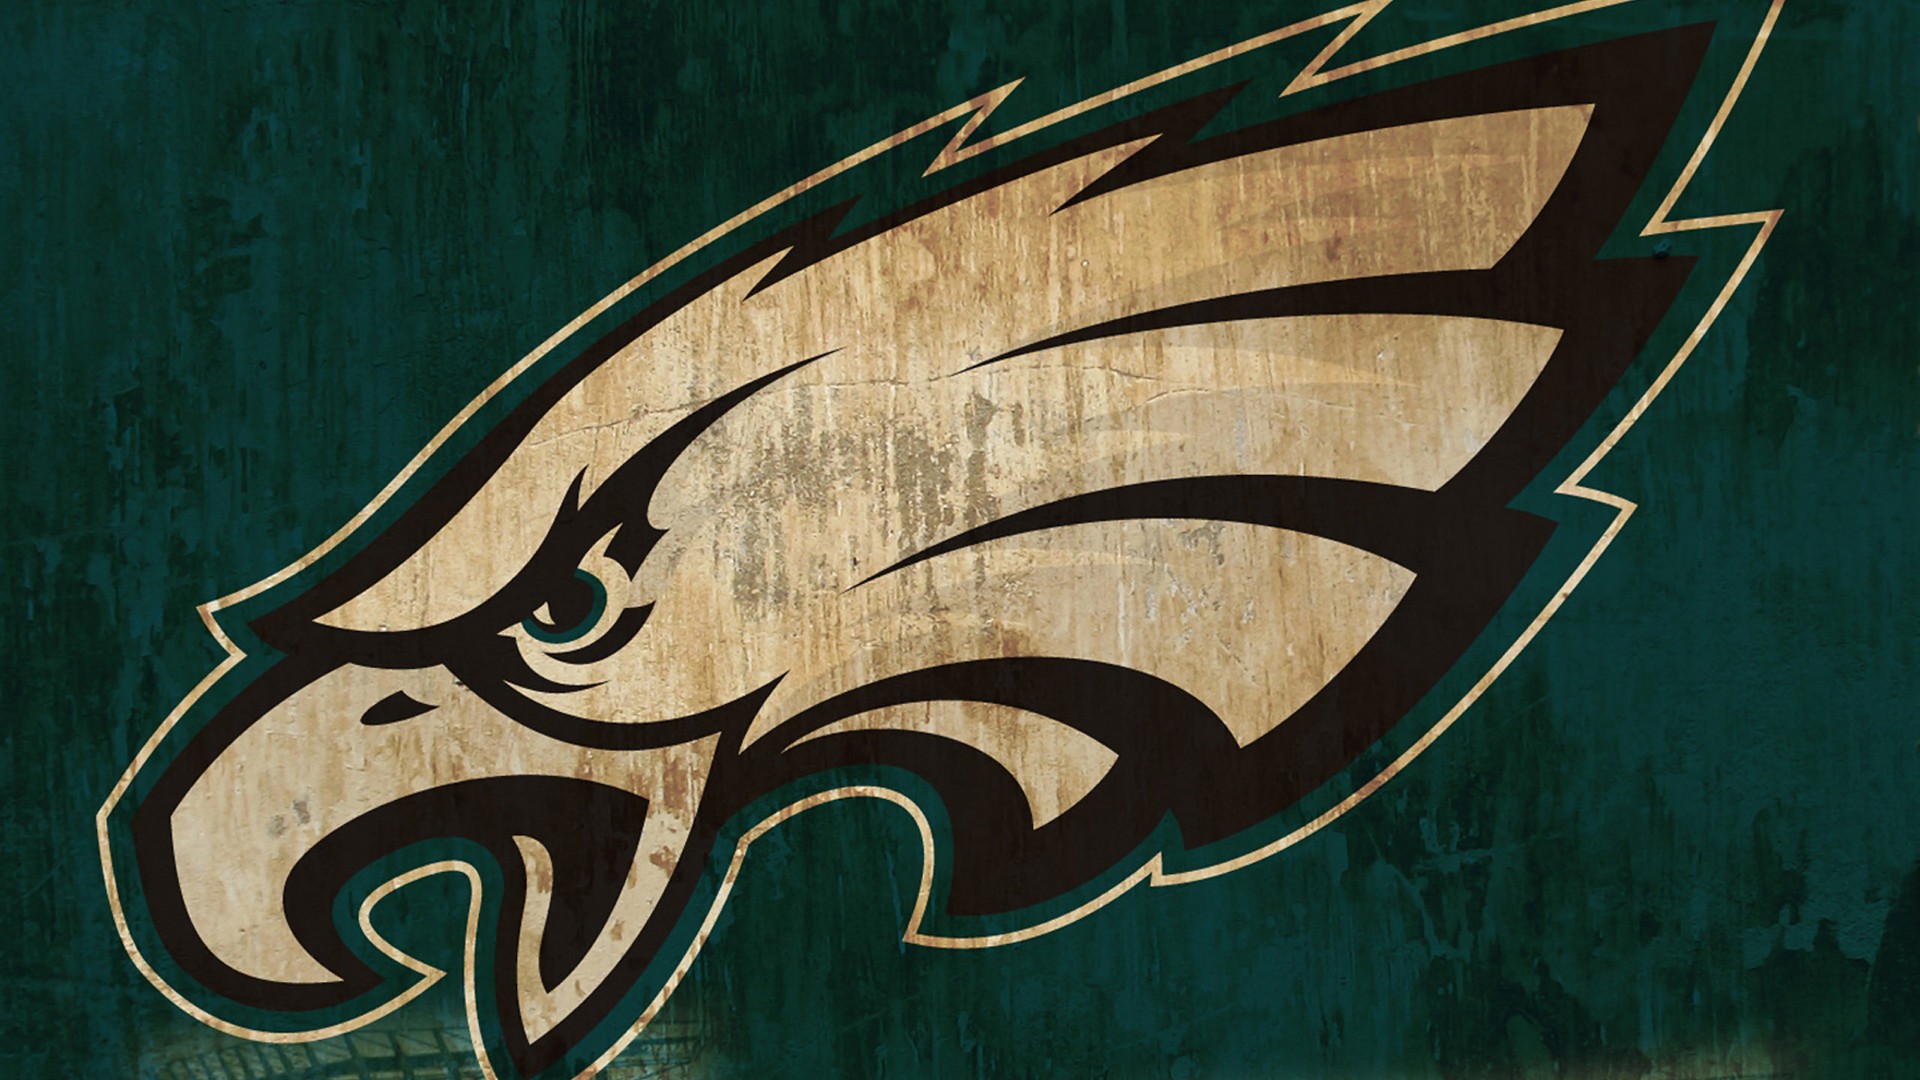 Wallpapers HD Phila Eagles With Resolution 1920X1080 pixel. You can make this wallpaper for your Mac or Windows Desktop Background, iPhone, Android or Tablet and another Smartphone device for free